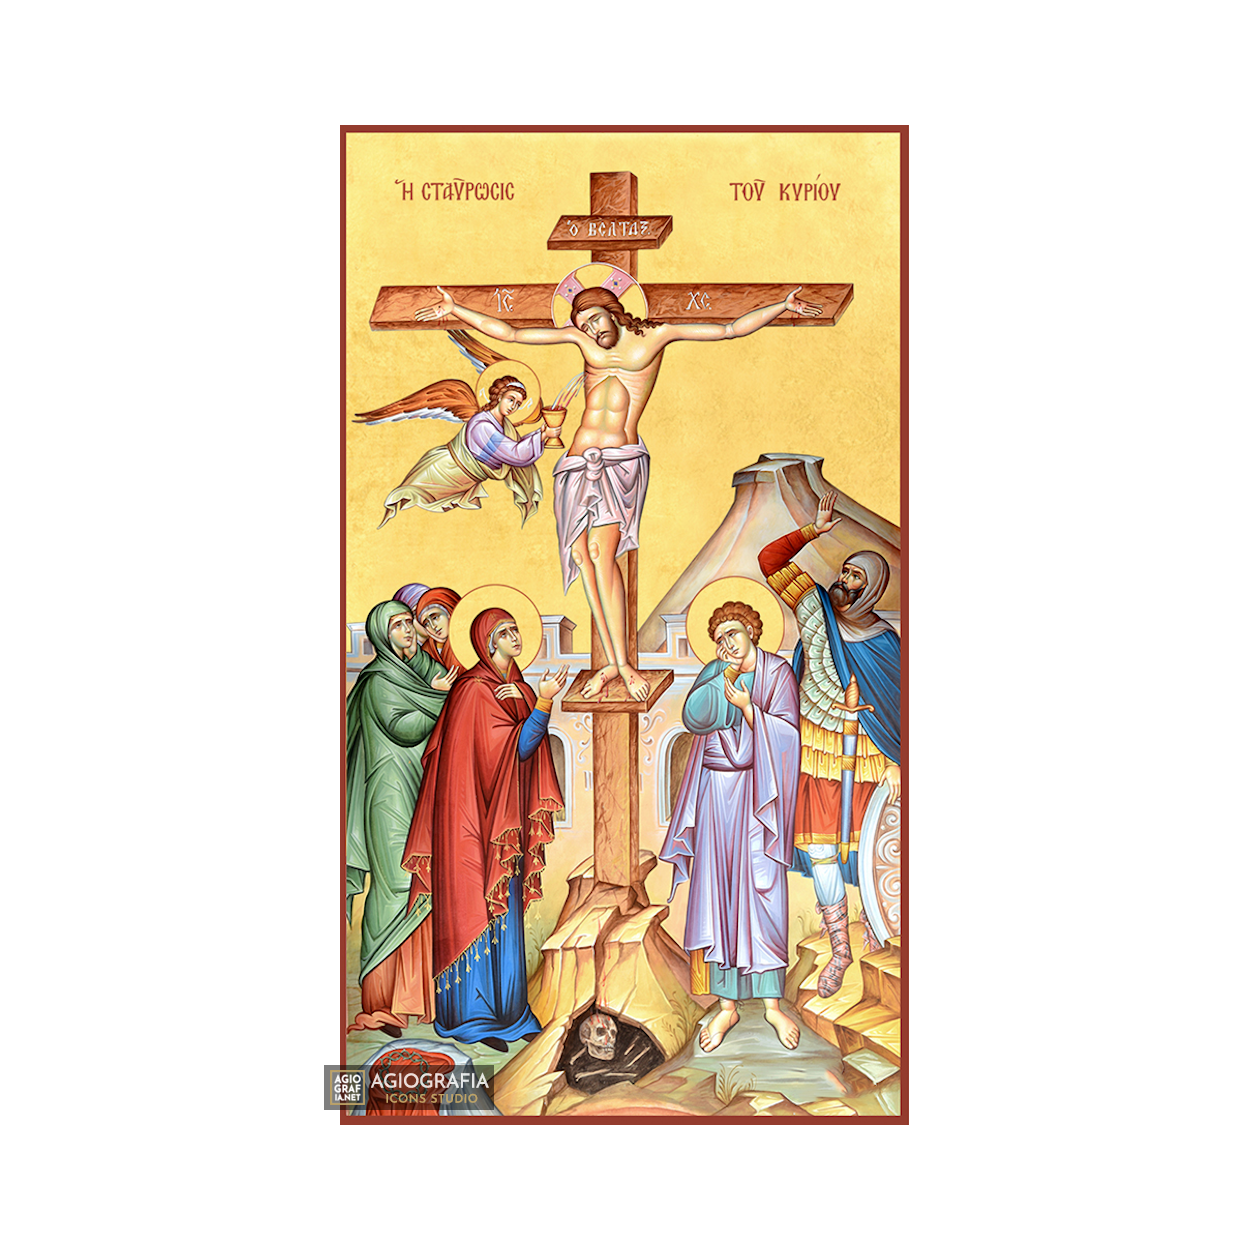 22k Crucifixion of the Lord - Gold Leaf Background Orthodox Icon